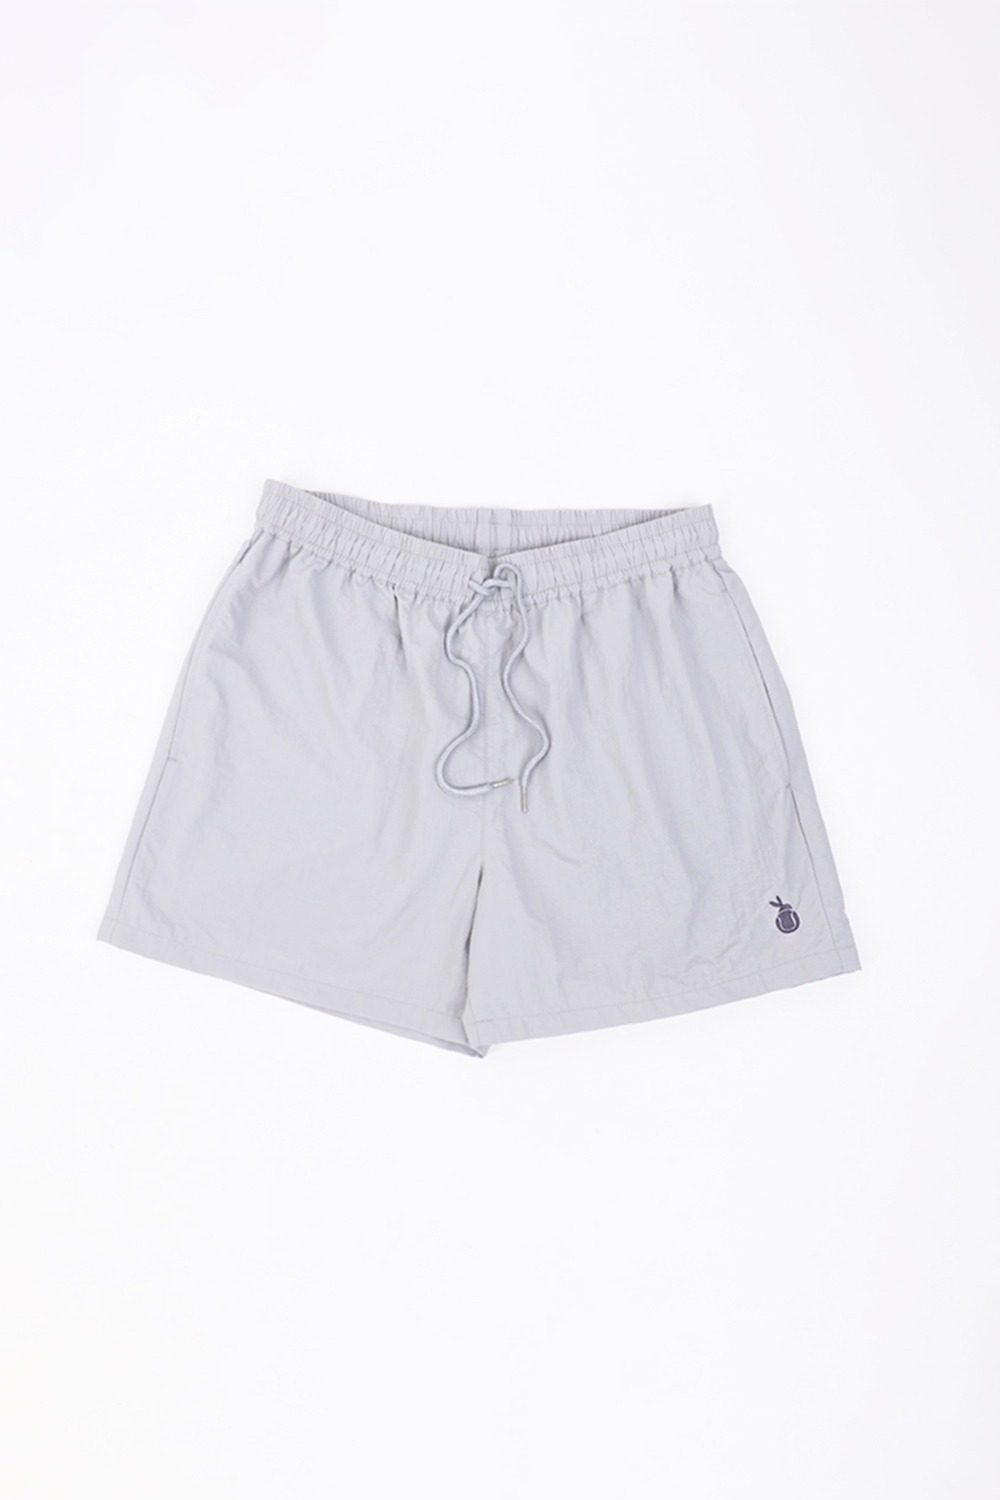 Clever Symbol Embroidered Athleisure Shorts  (Gray) RICHEZ